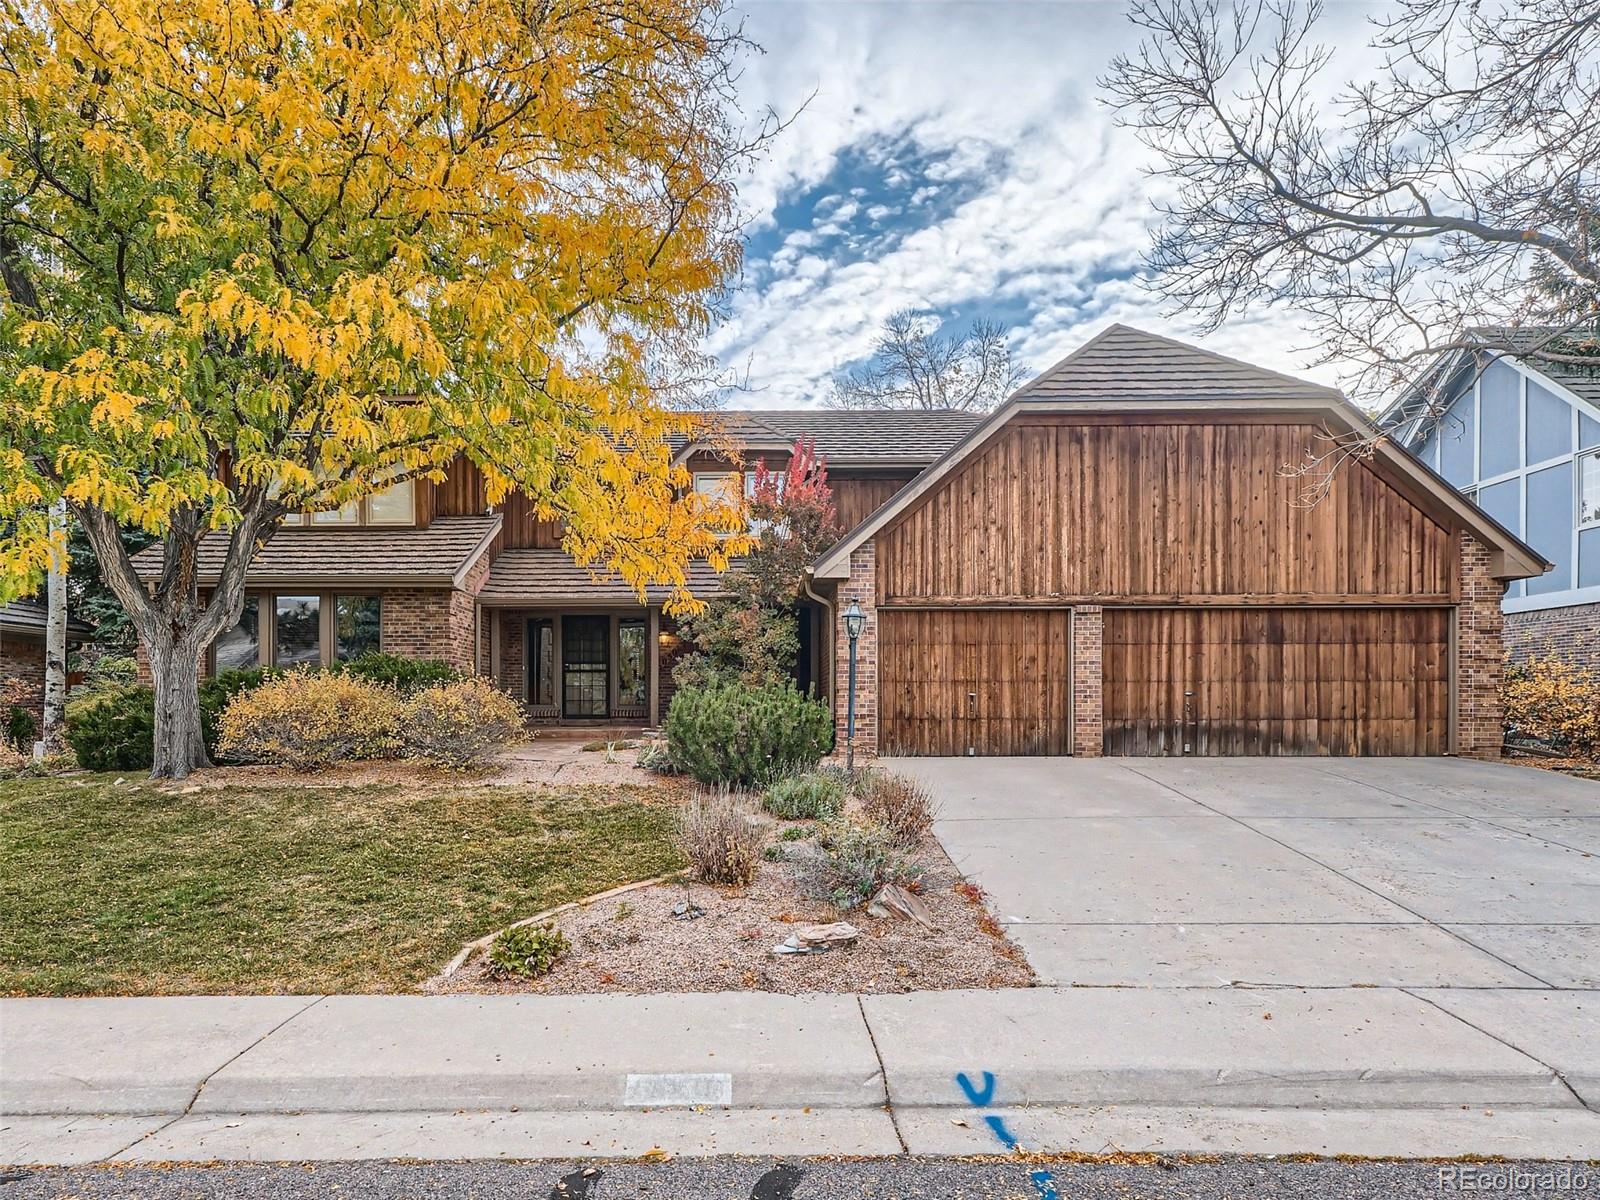 Report Image for 6050 S Chester Way,Greenwood Village, Colorado